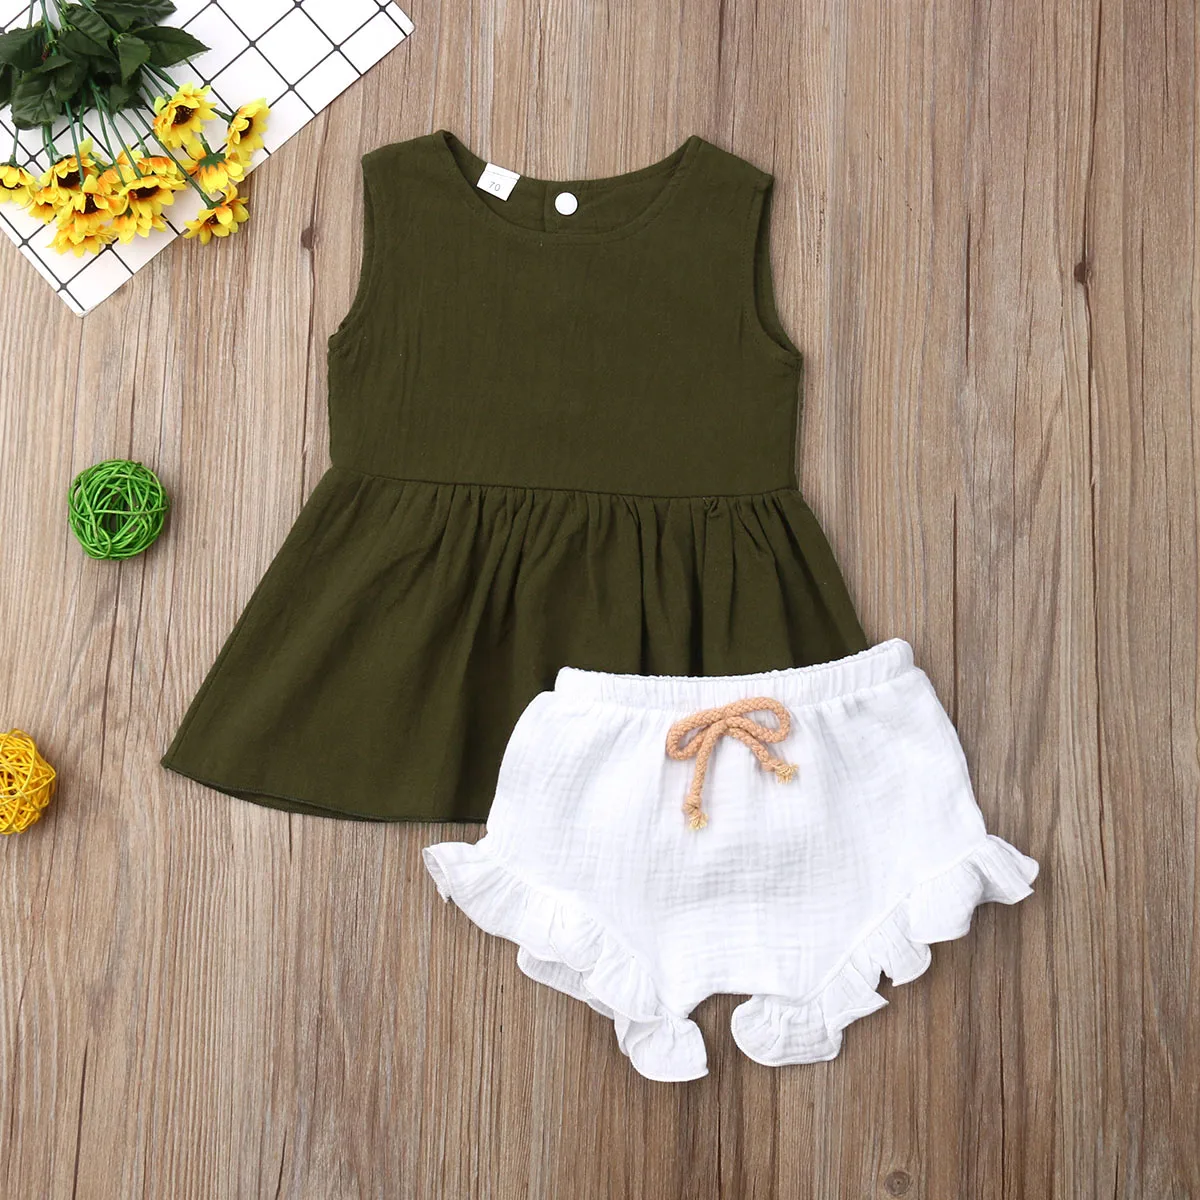 

Emmababy Newborn Baby Girl Clothes Sleeveless Solid Color Ruffle Tops Short Pants 2PCS Outfits Summer Clothes